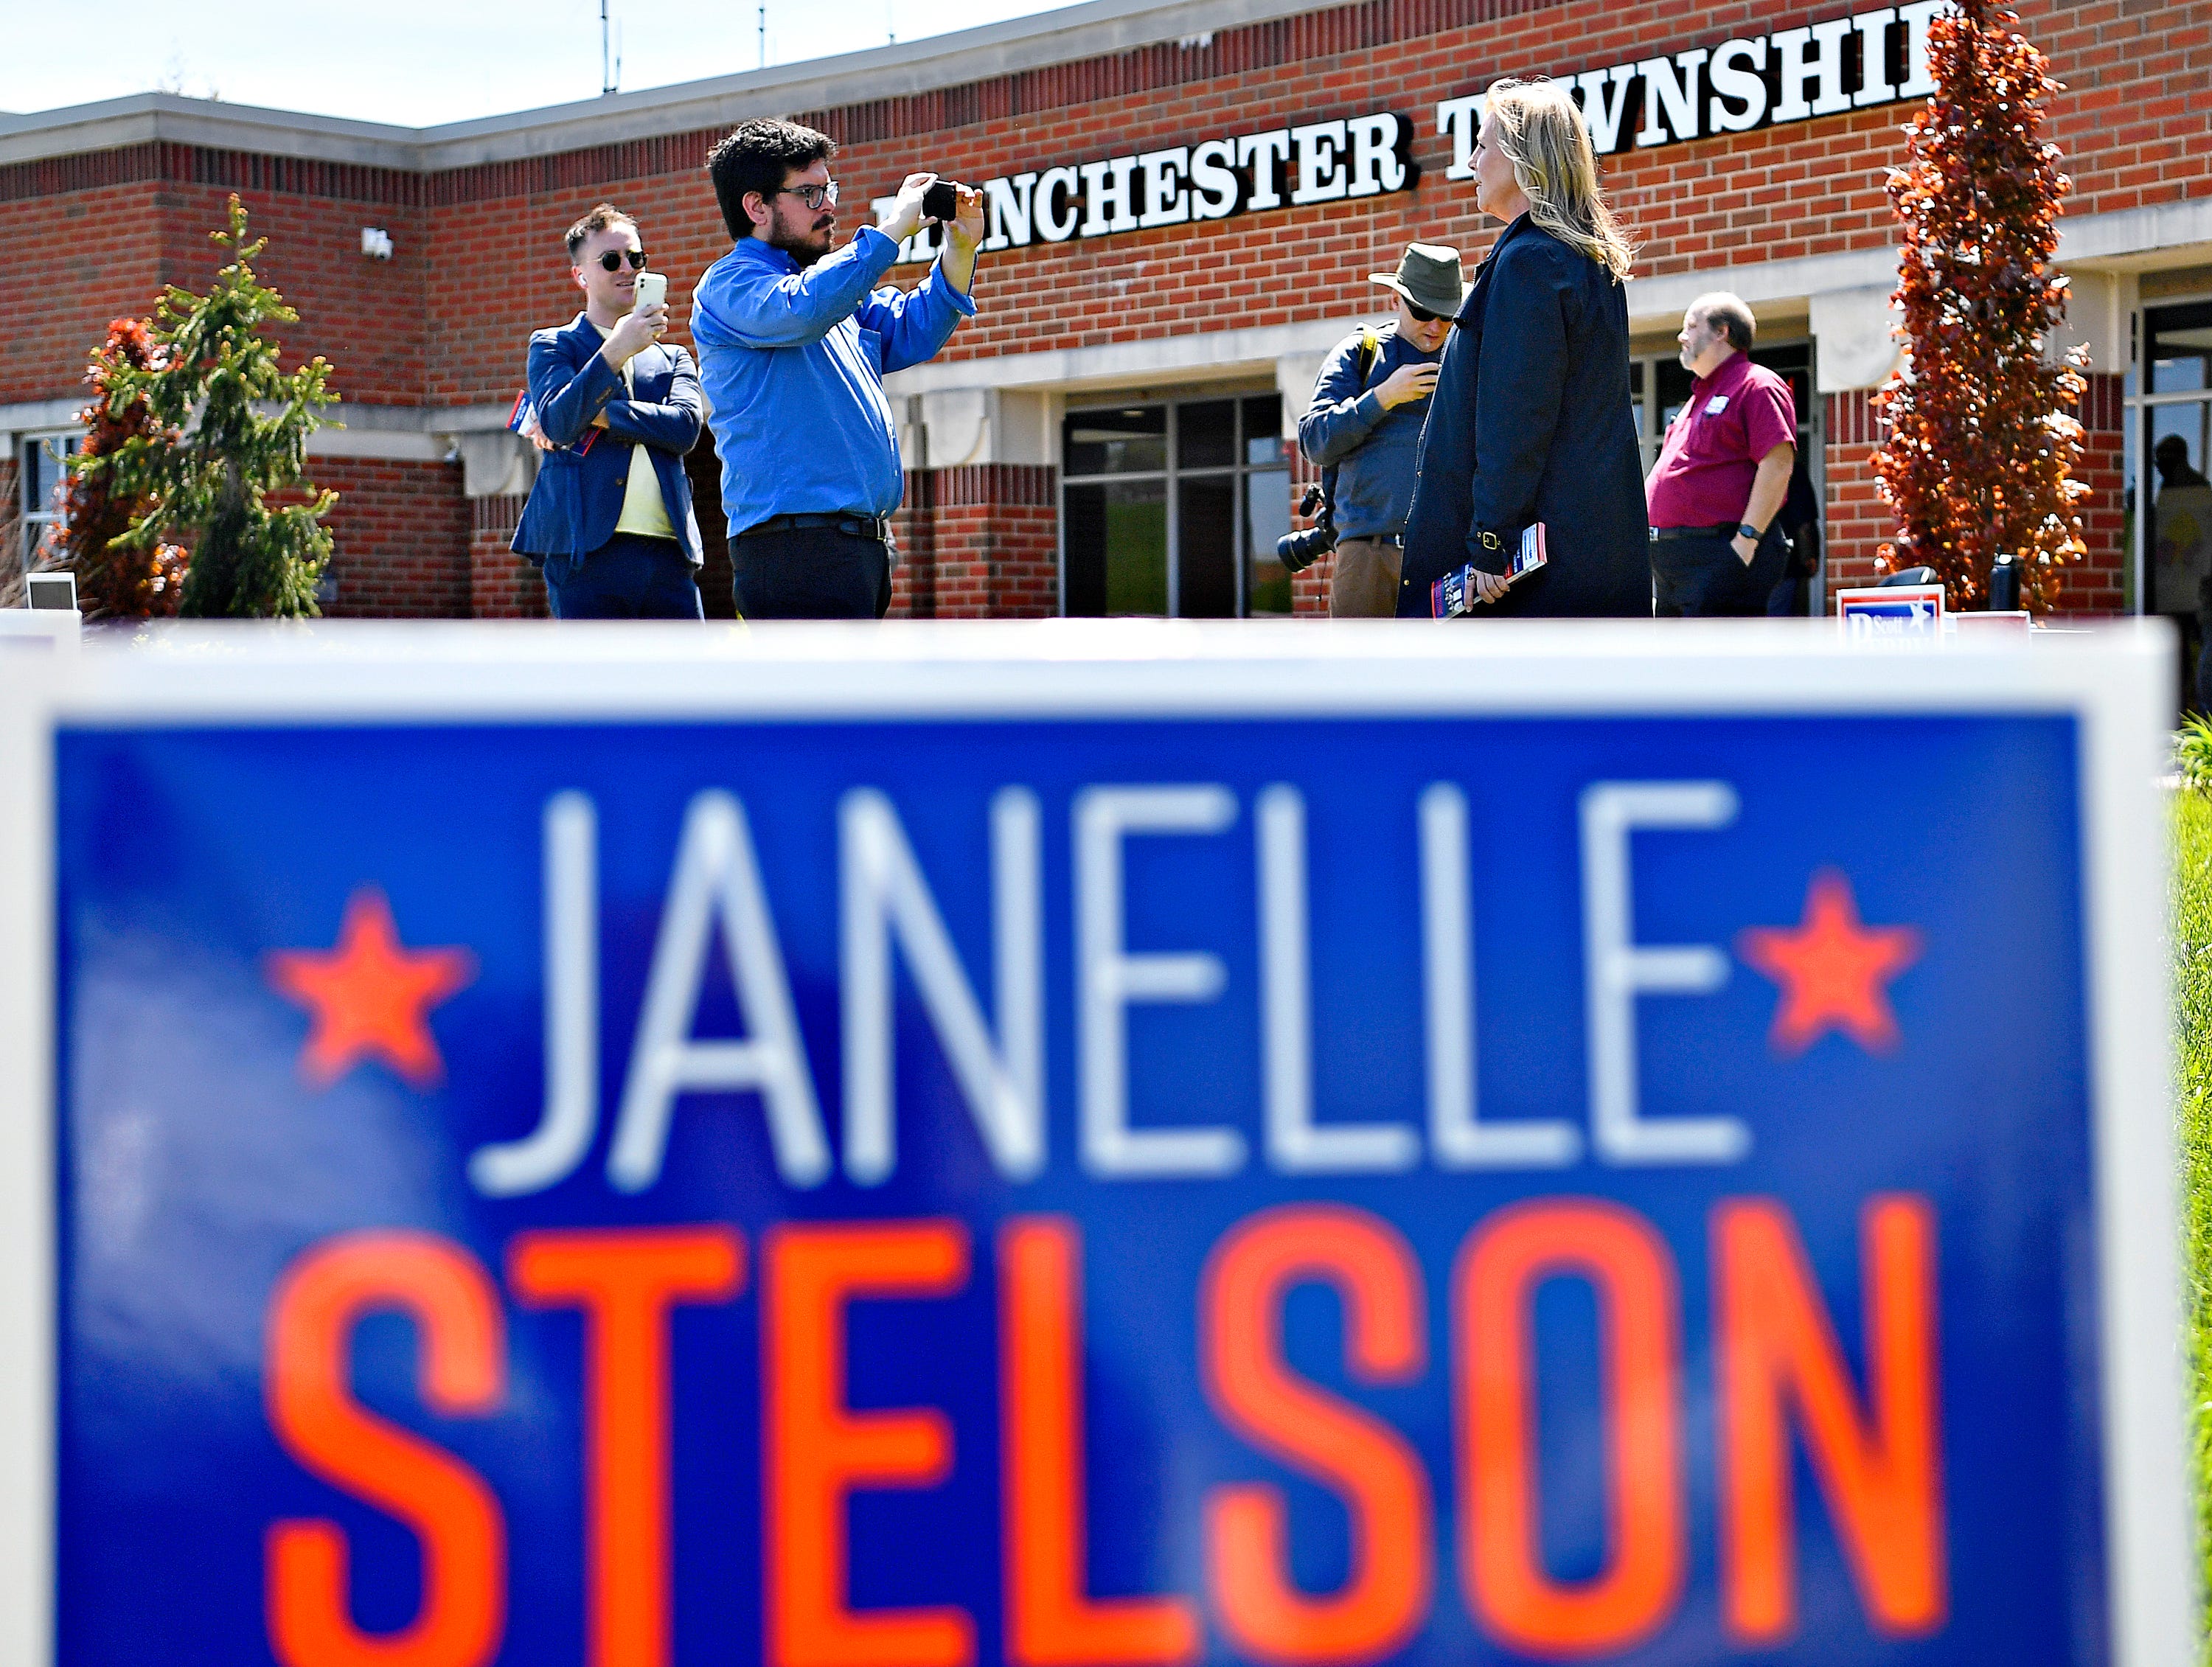 Janelle Stelson, Democratic candidate for the 10th Congressional District, front right, is interviewed by York Dispatch reporter Matthew Enright, outside of the Manchester Township Building during Primary Election Day in Manchester Township, Tuesday, April 23, 2024. (Dawn J. Sagert/The York Dispatch)